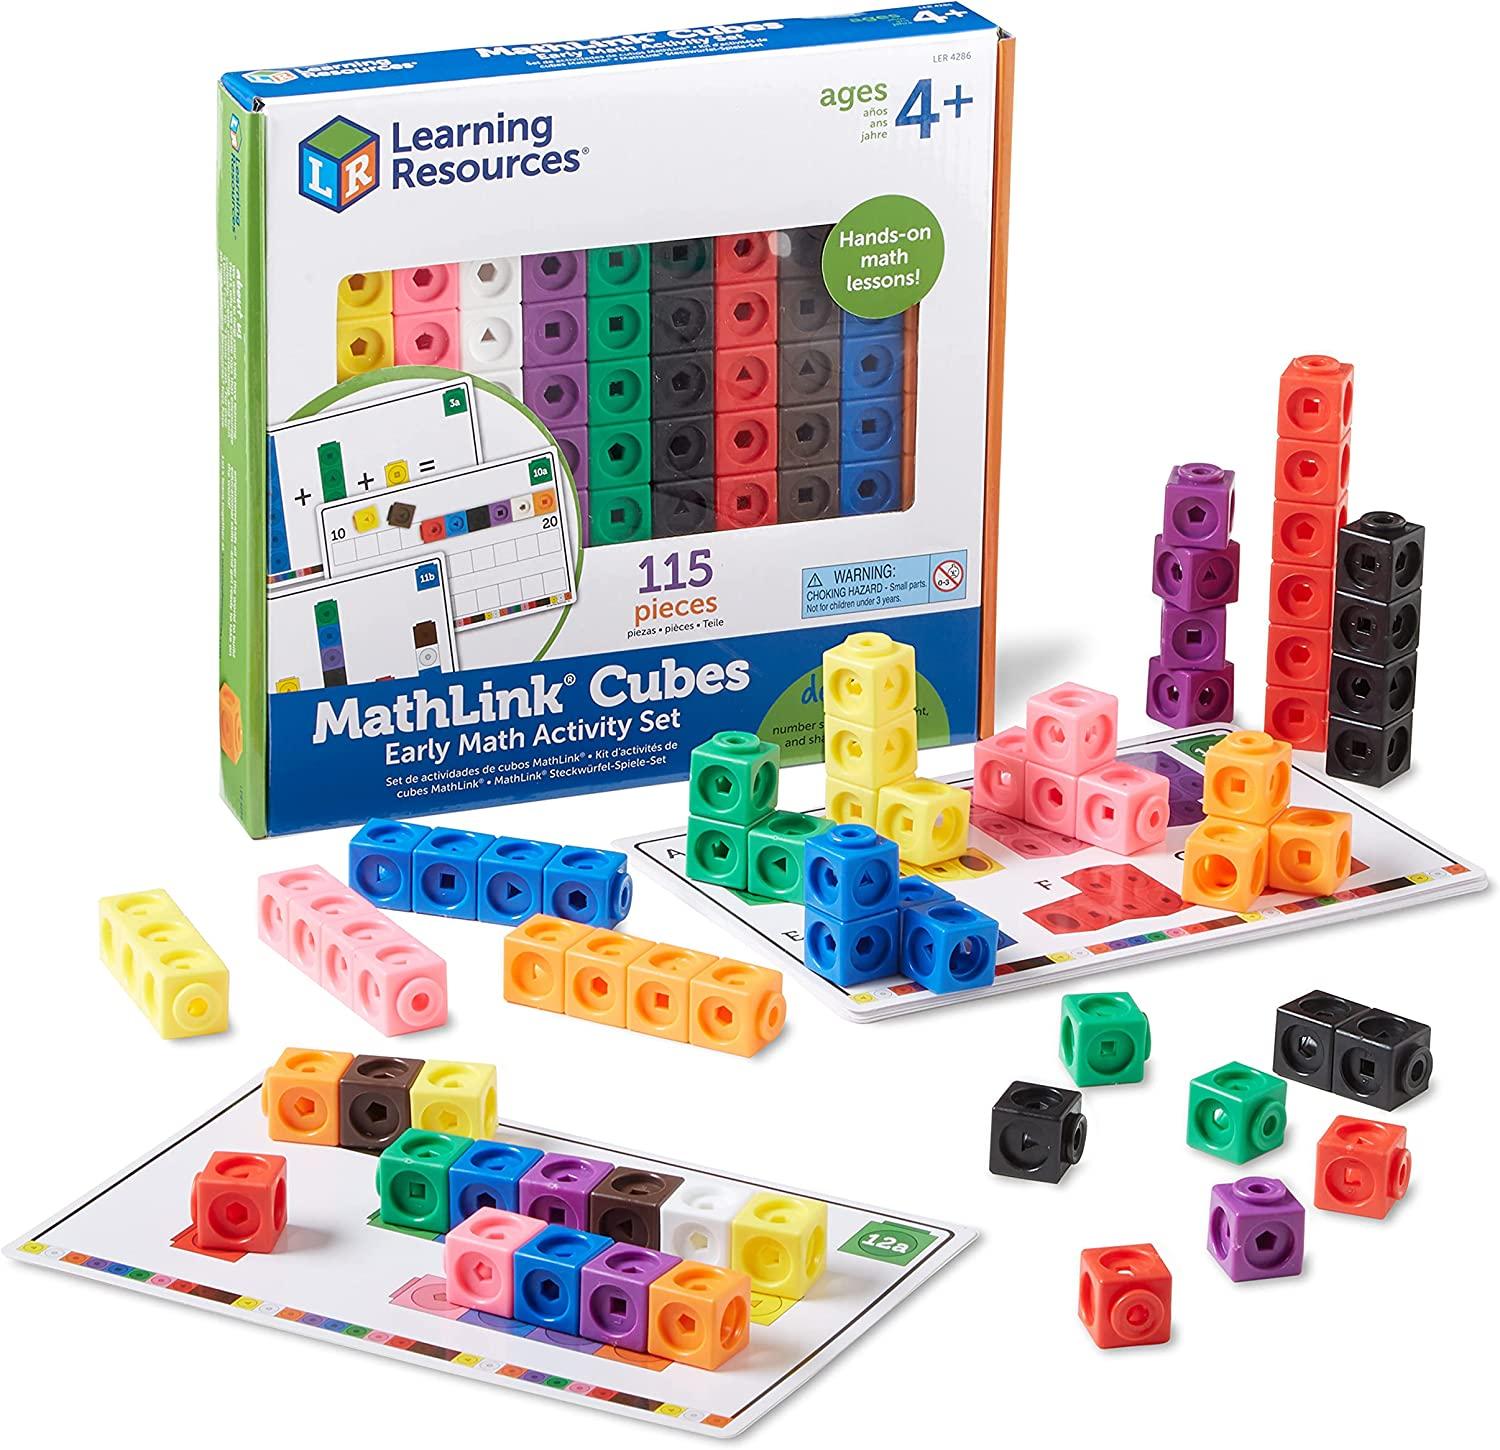 115-Piece Learning Resources MathLink Cubes Early Math Activity Set for $7.49